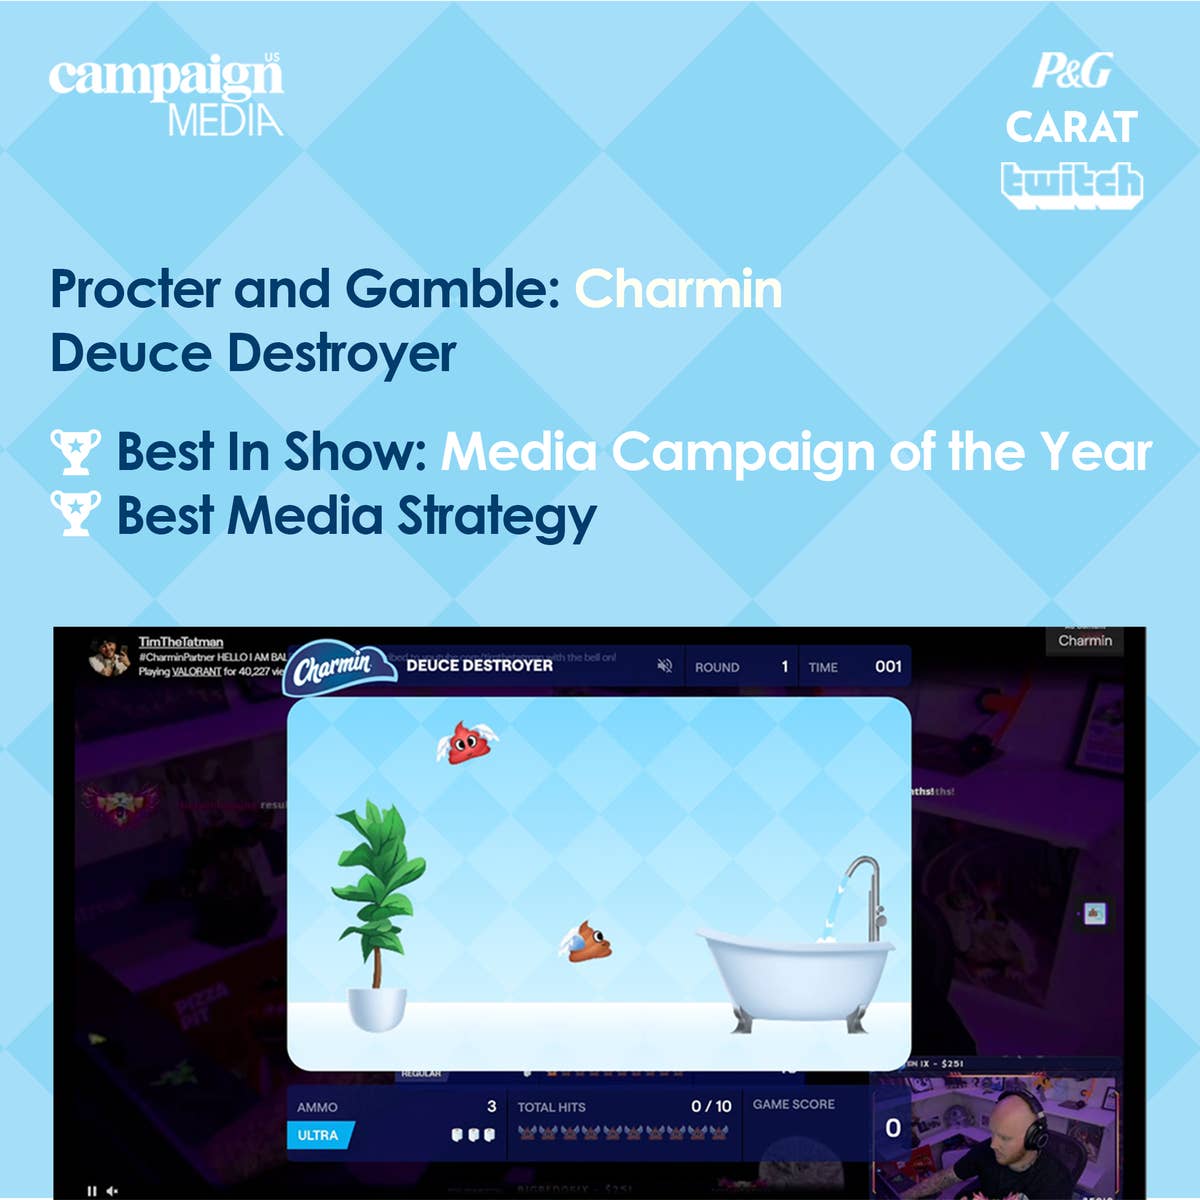 Charmin Deuce Destroyer takes home two Campaign Media Awards